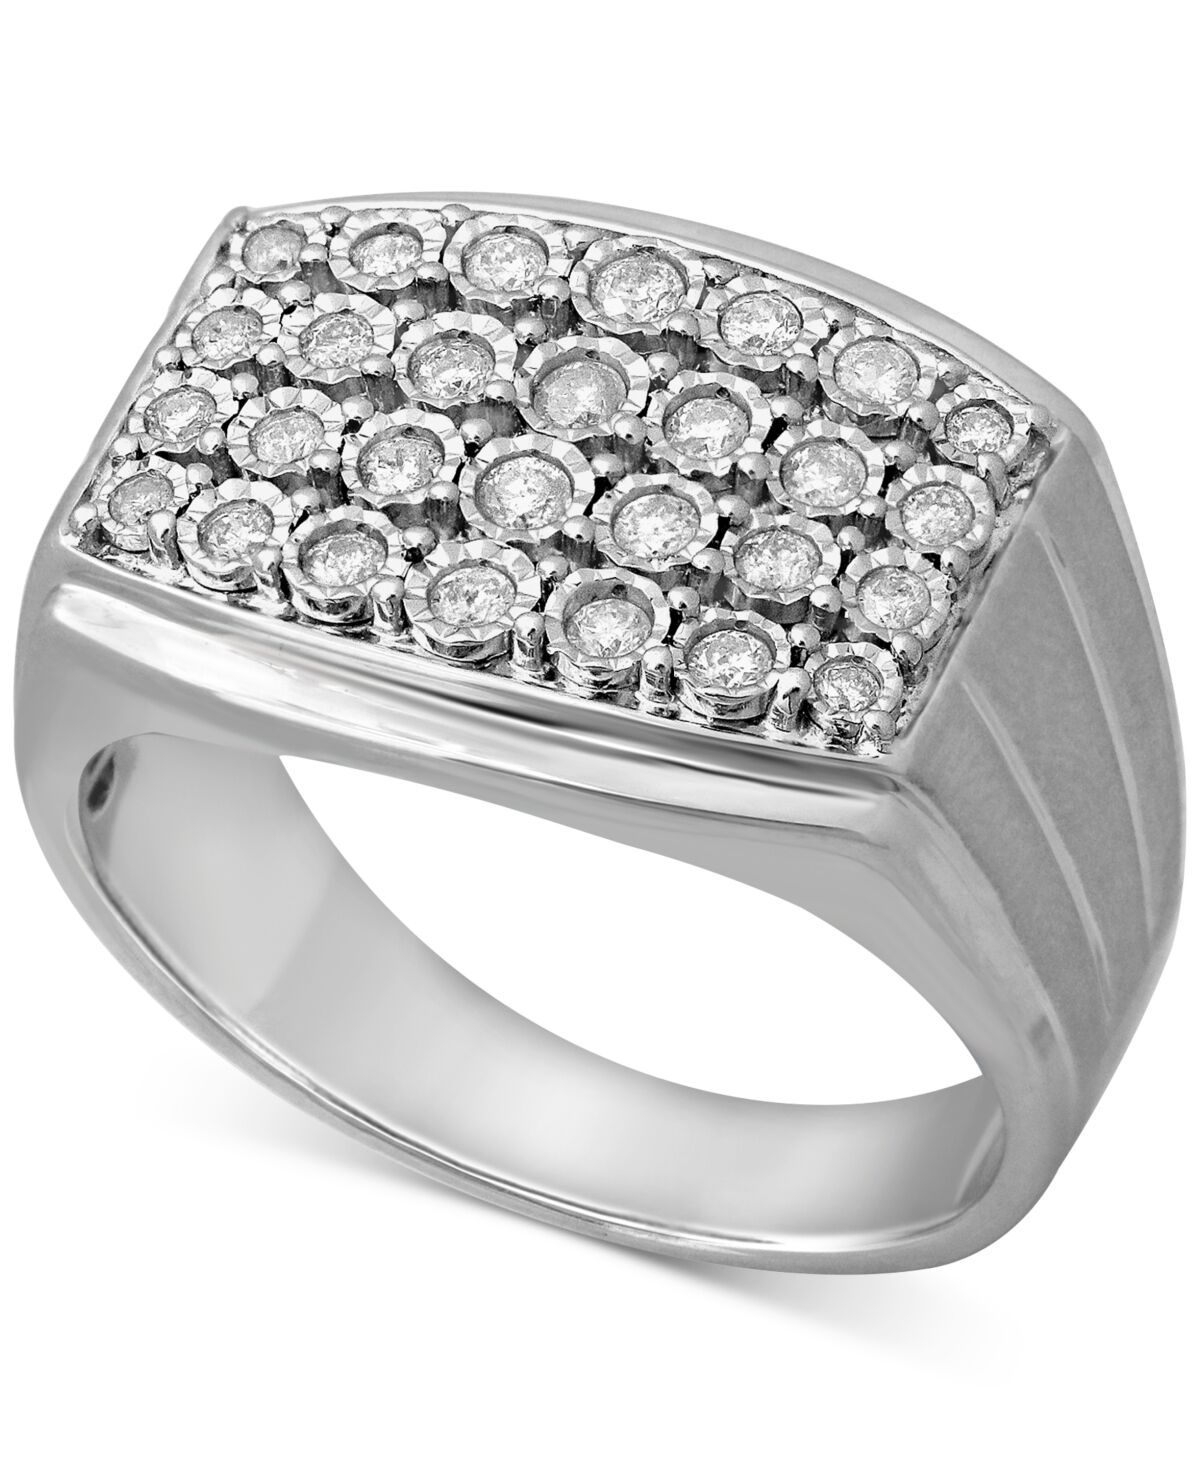 Macy's Men's Diamond Cluster Ring (1/2 ct. t.w.) in Sterling Silver or 14k Gold-Plated Silver - Silver